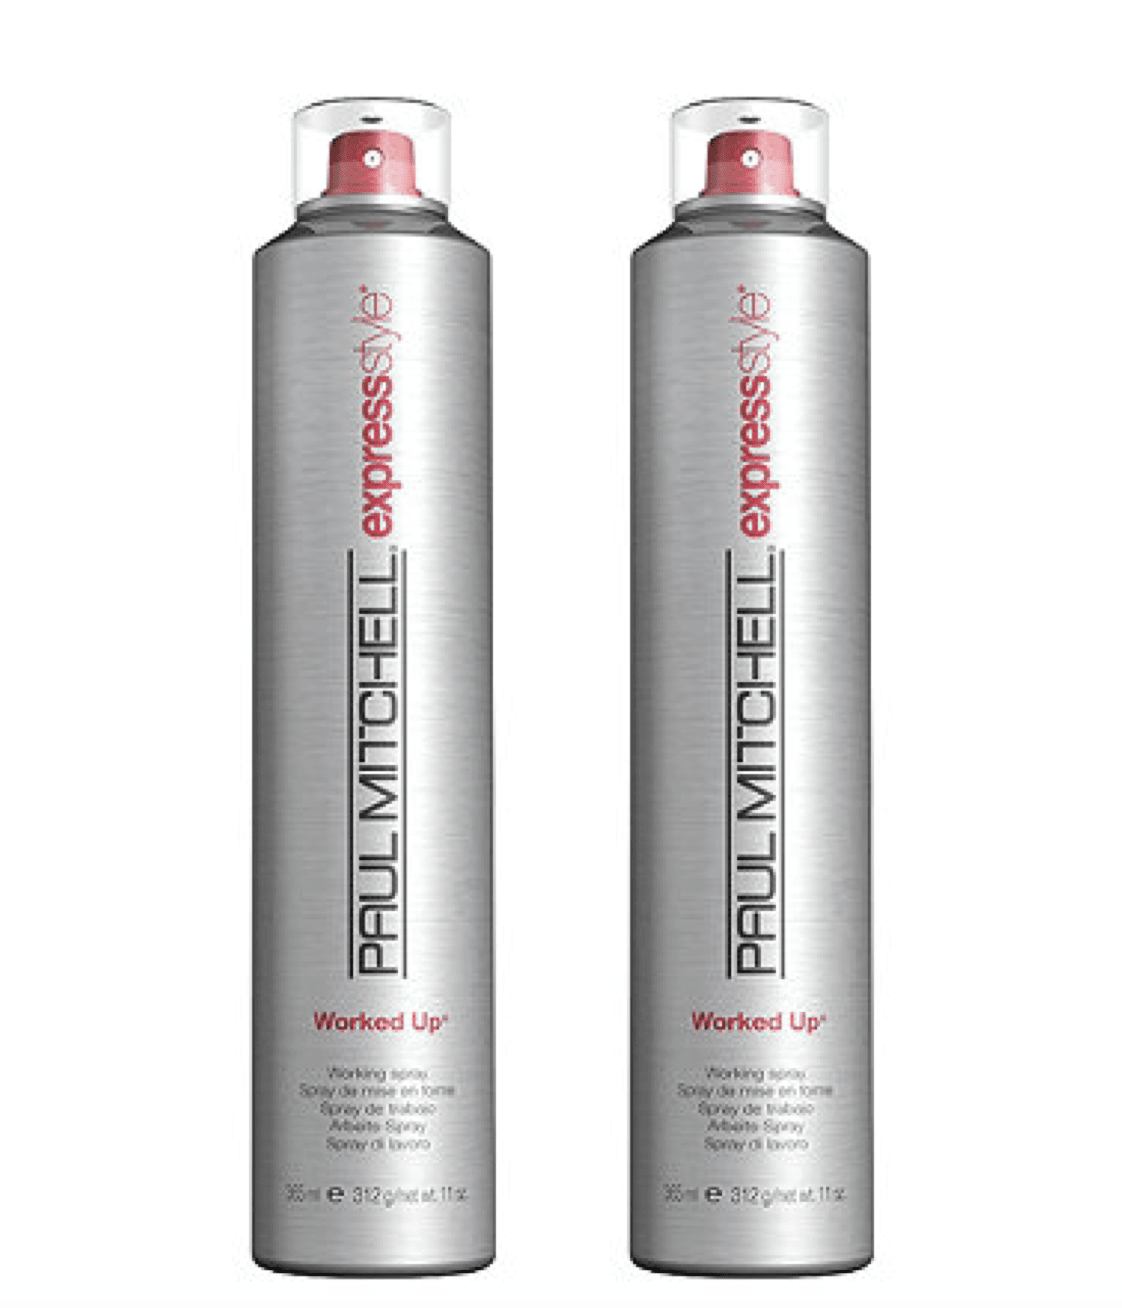 Paul Mitchell Express Style Worked Up 300ml x 2 Duo Pack